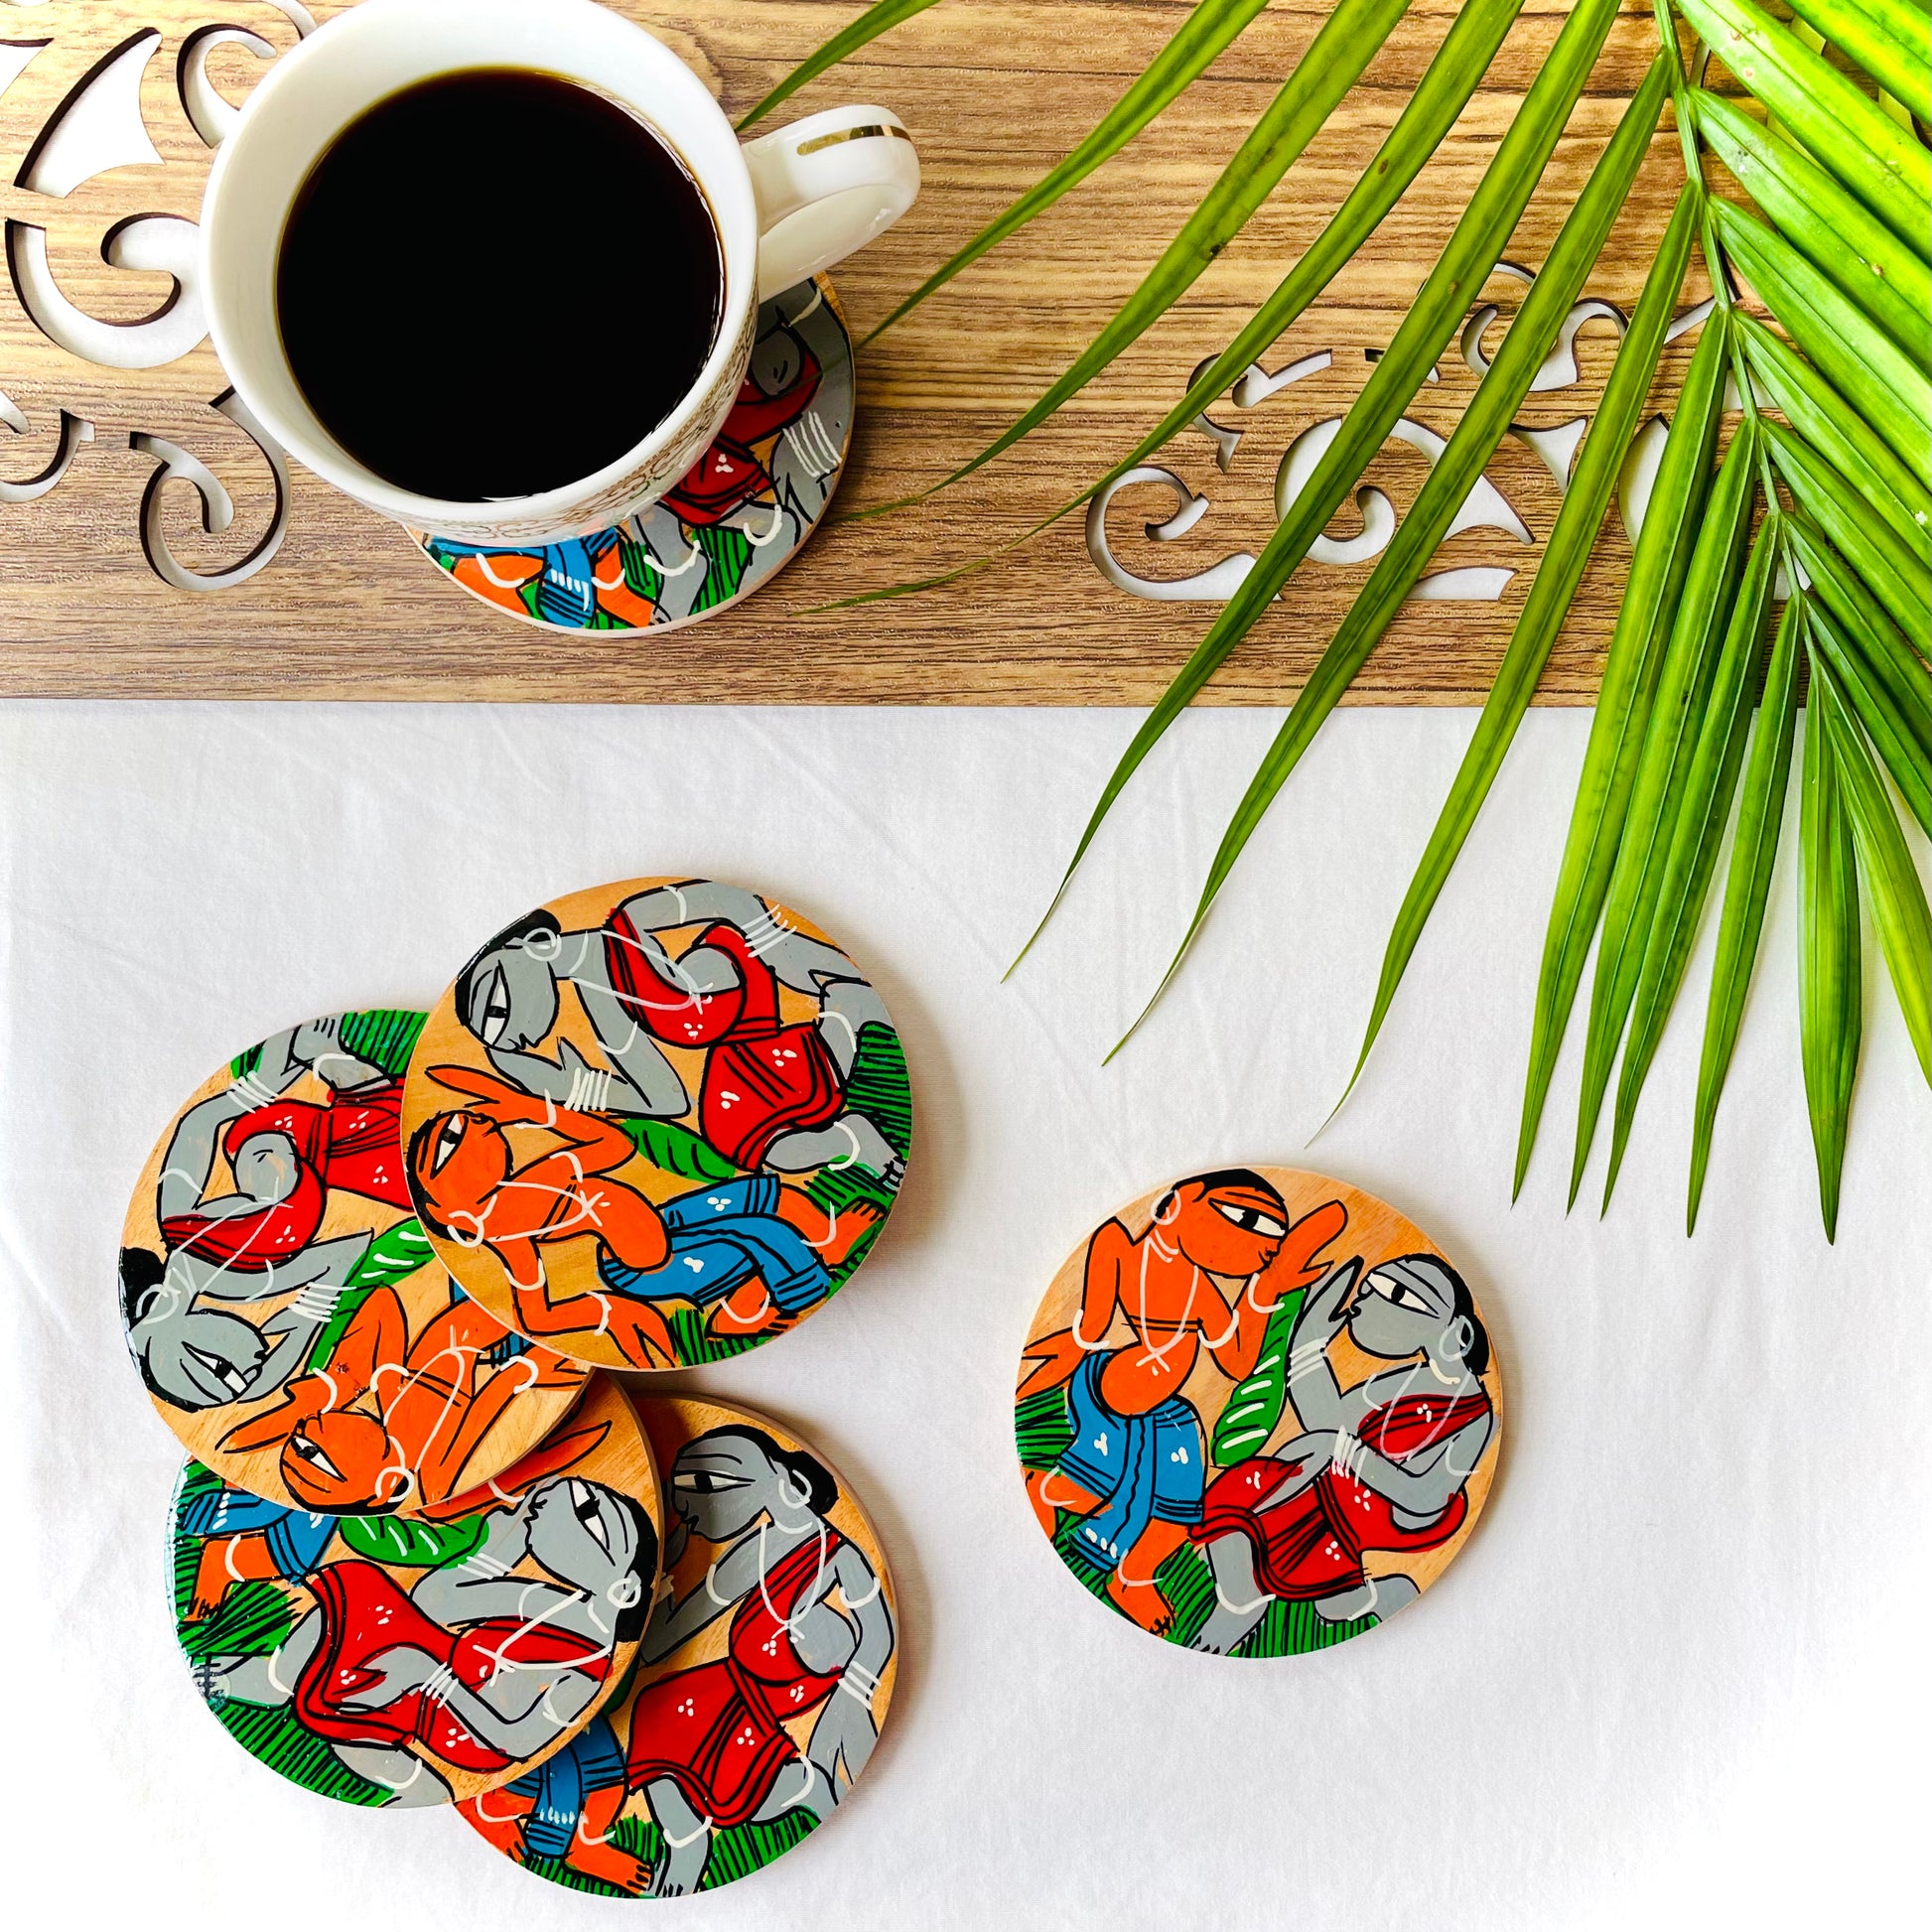 Five pure mango wood round wood coasters hand painted with tribal characters dancing are placed near a teacup filled with black tea with leaves in the background